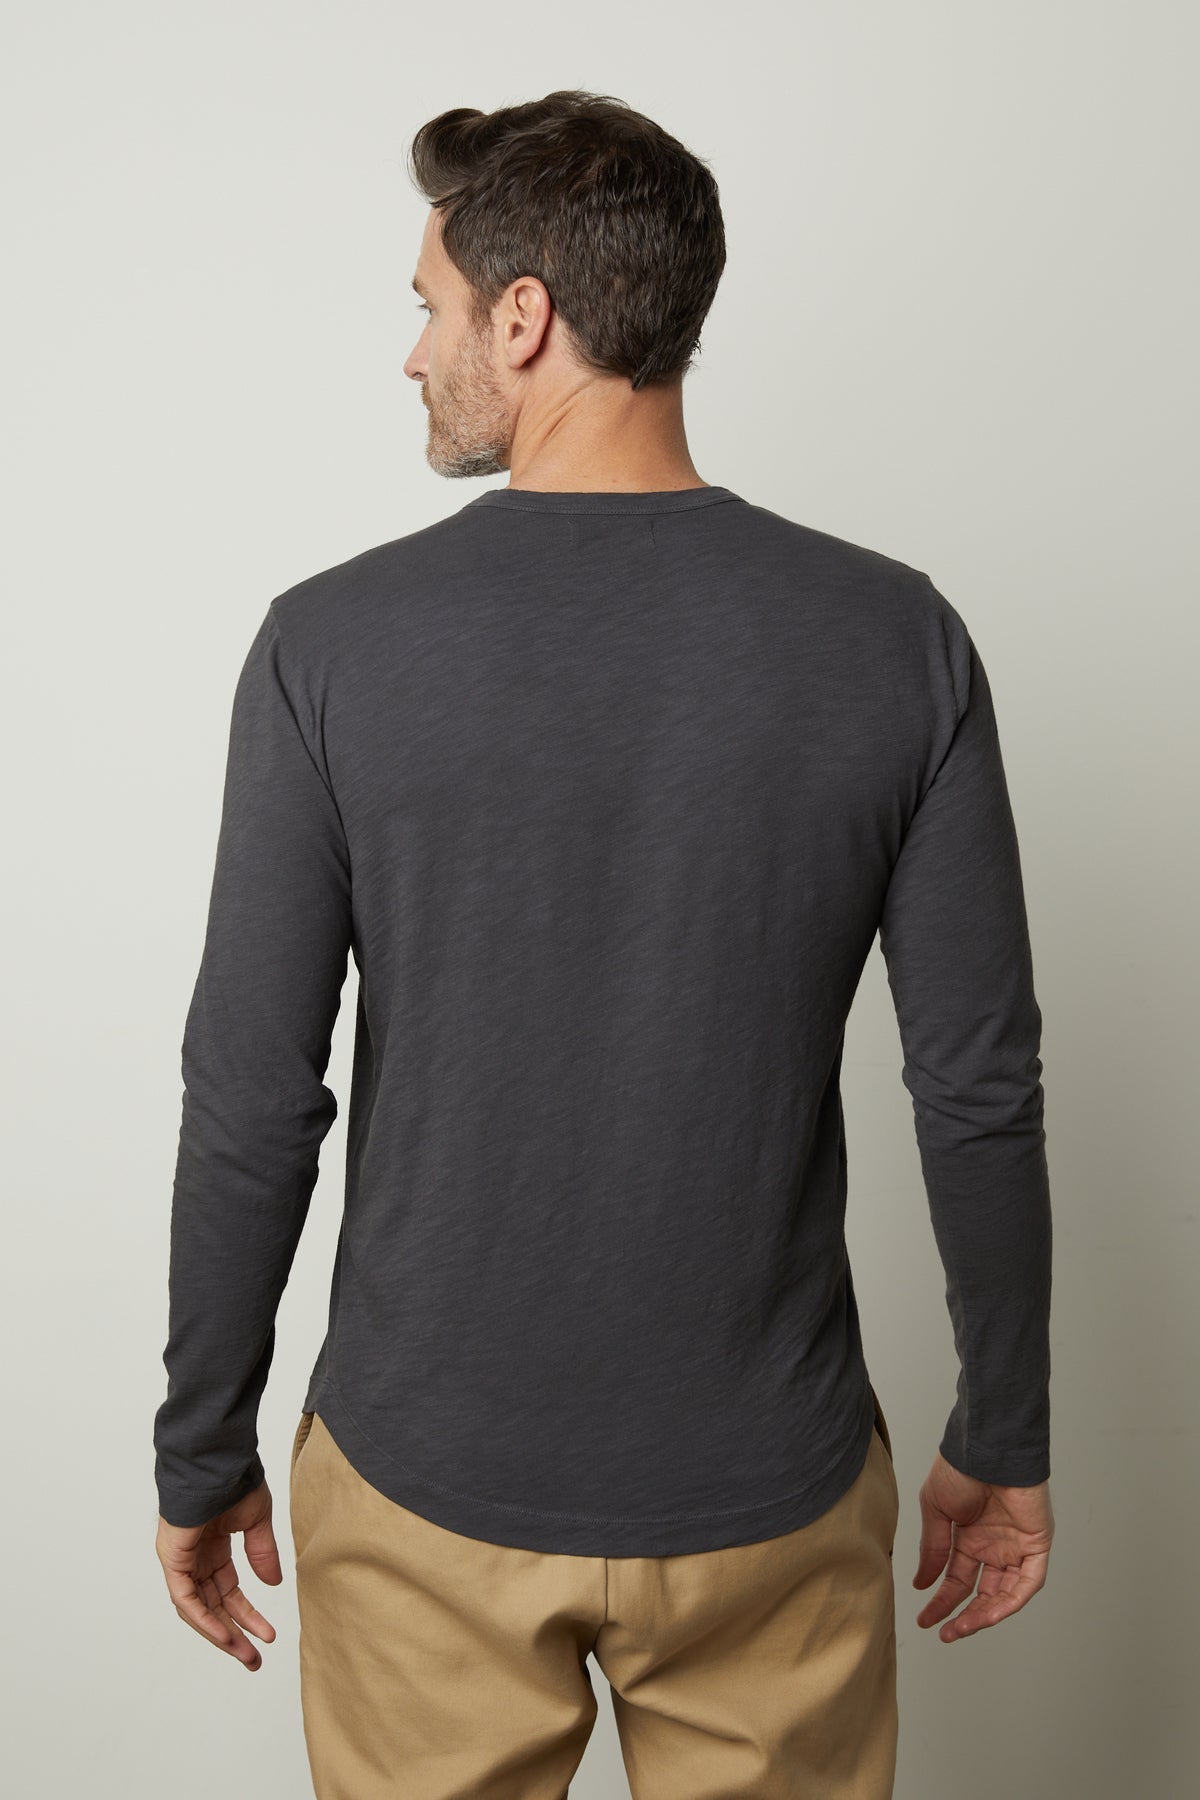 The back view of a man wearing a Velvet by Graham & Spencer KAI CREW NECK TEE.-35782958743745